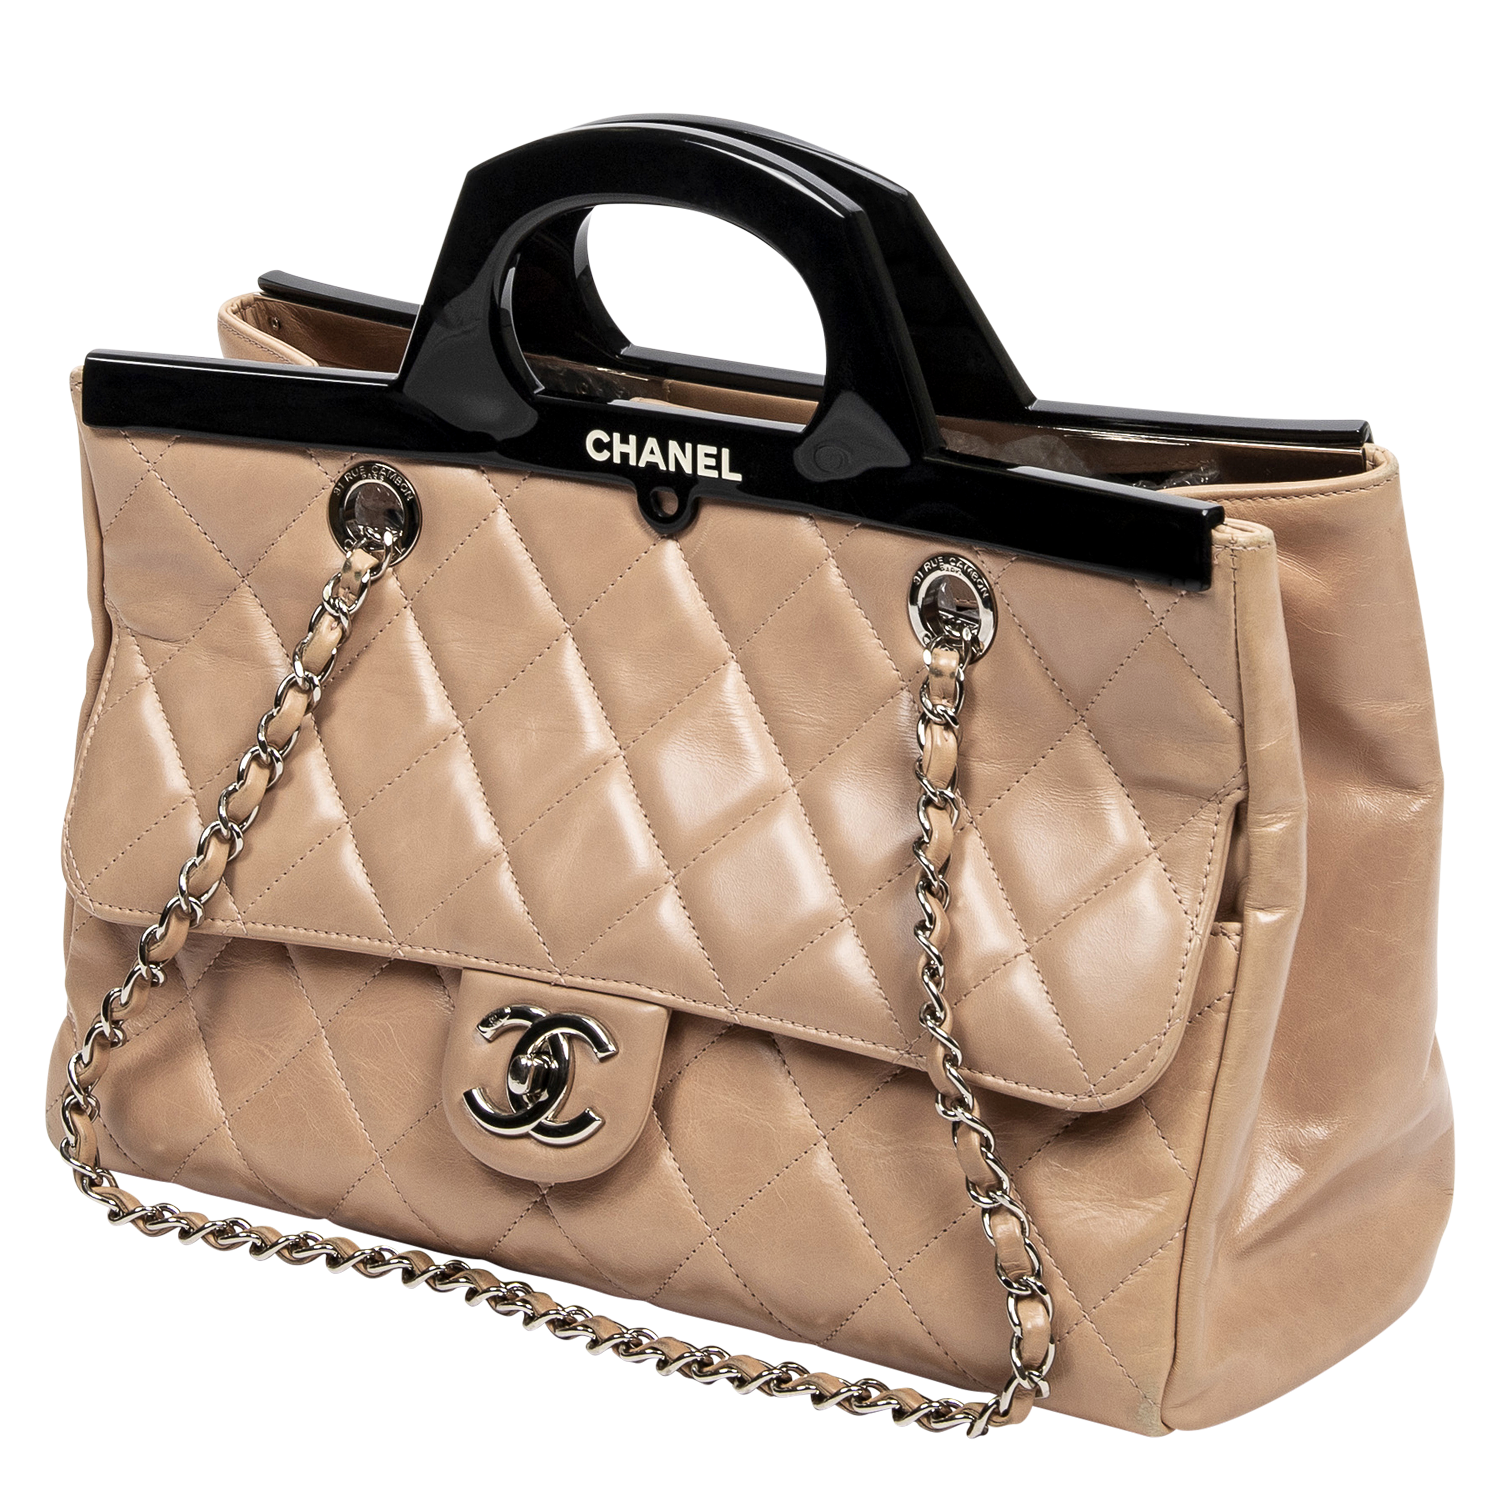 Chanel 2015 Limited Edition Delivery Tote - shop 